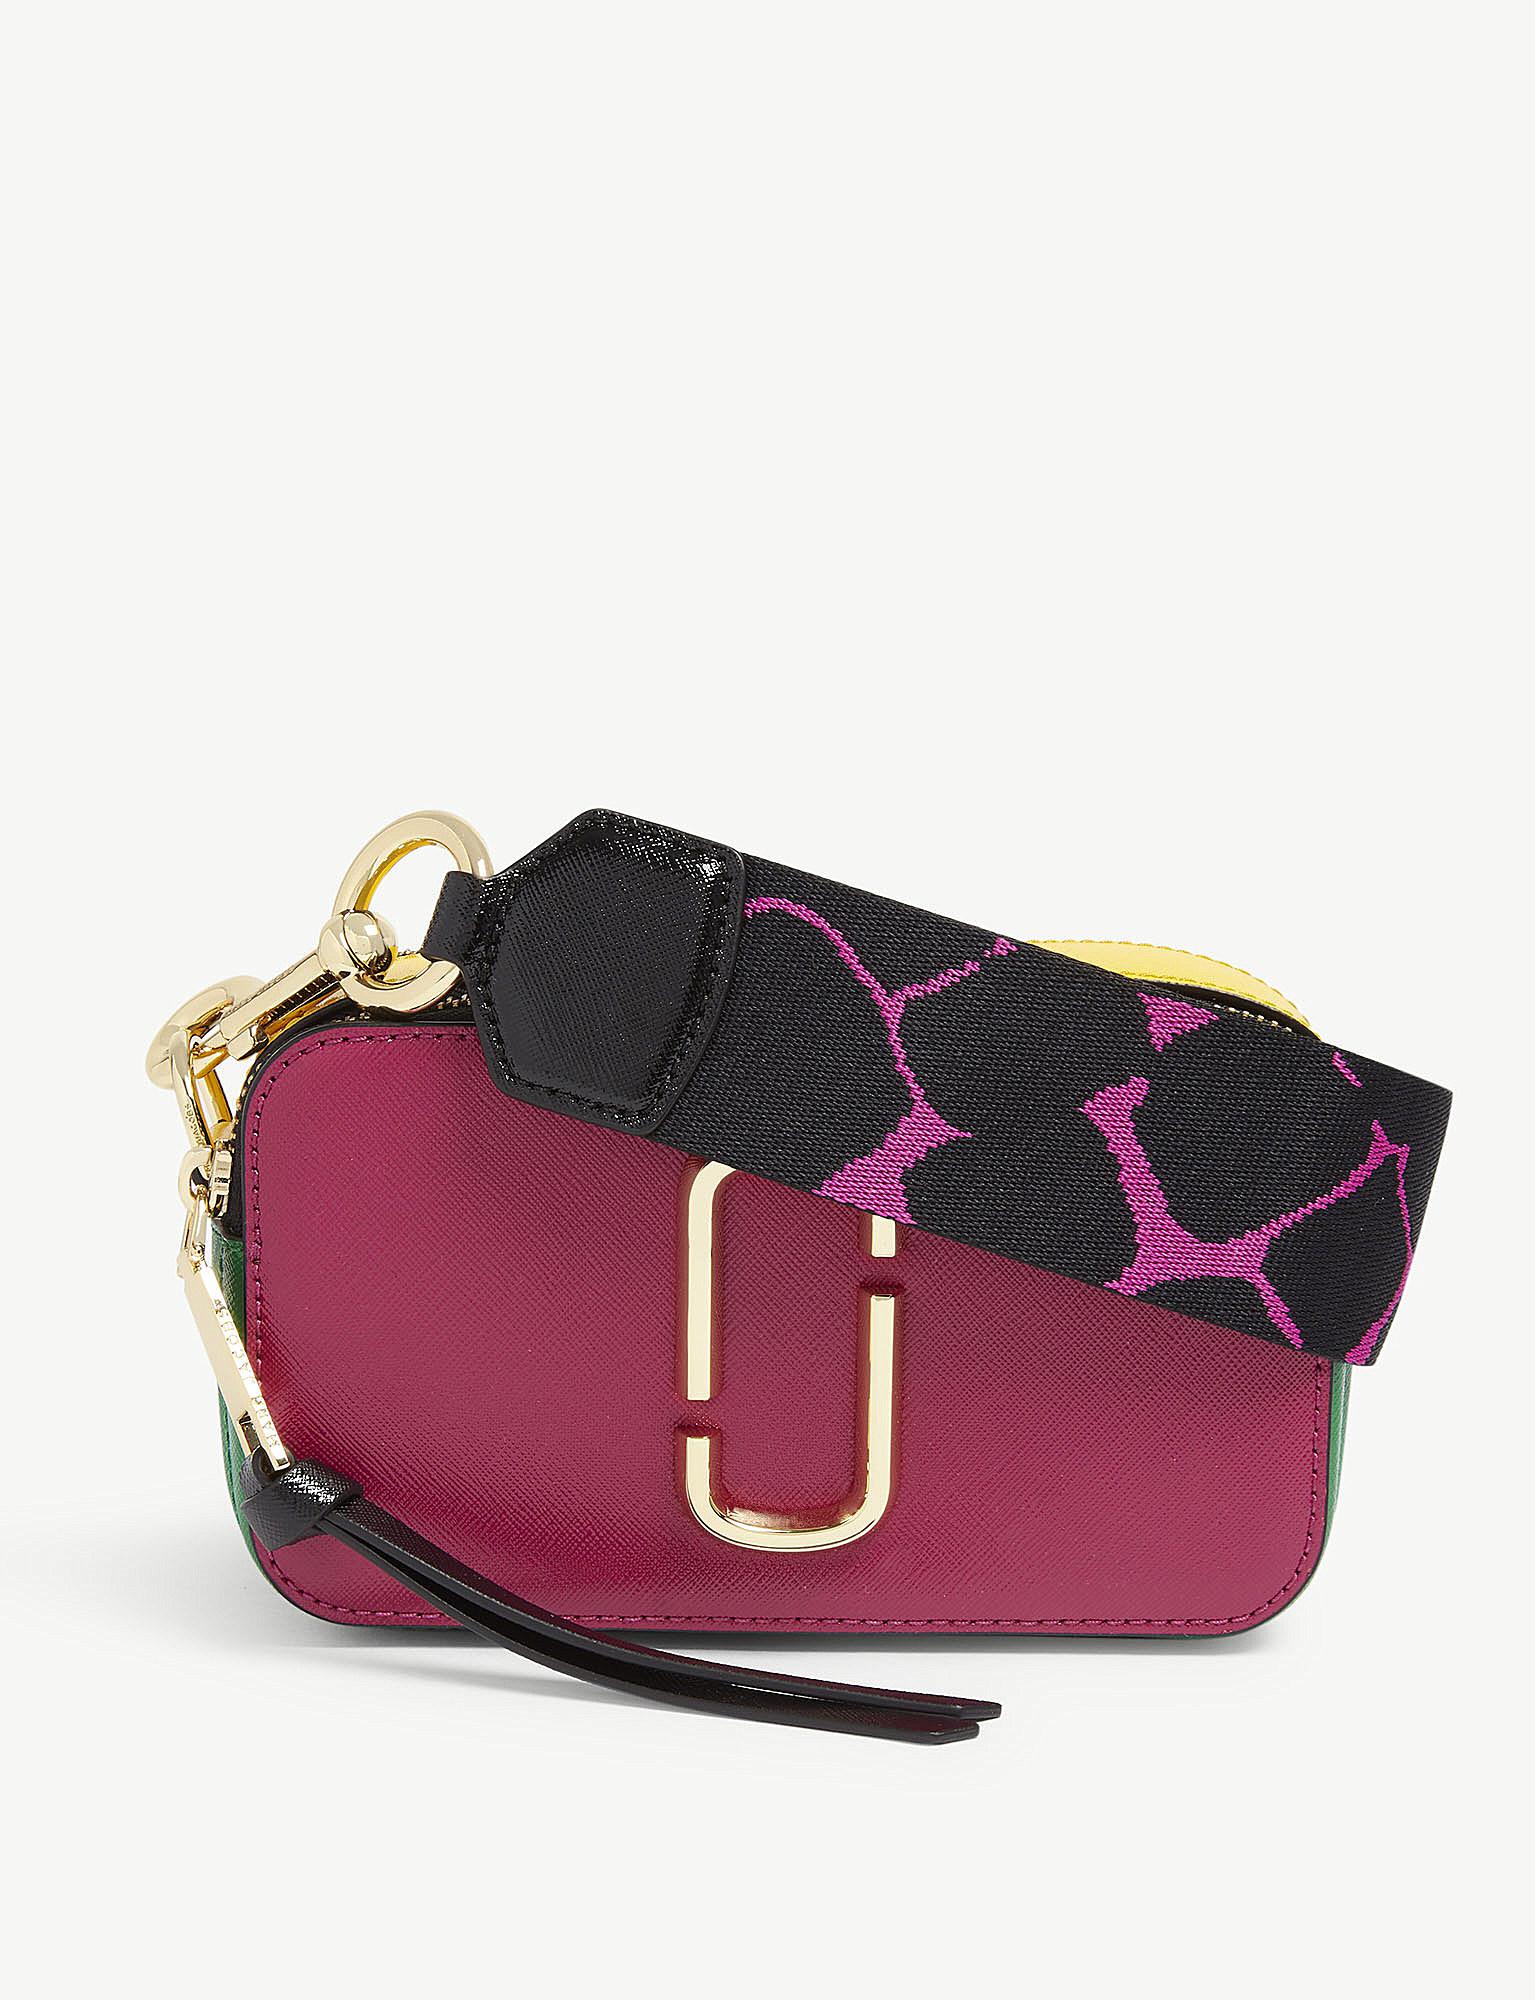 Marc Jacobs Leather Snapshot Cross-body Bag in Purple - Lyst